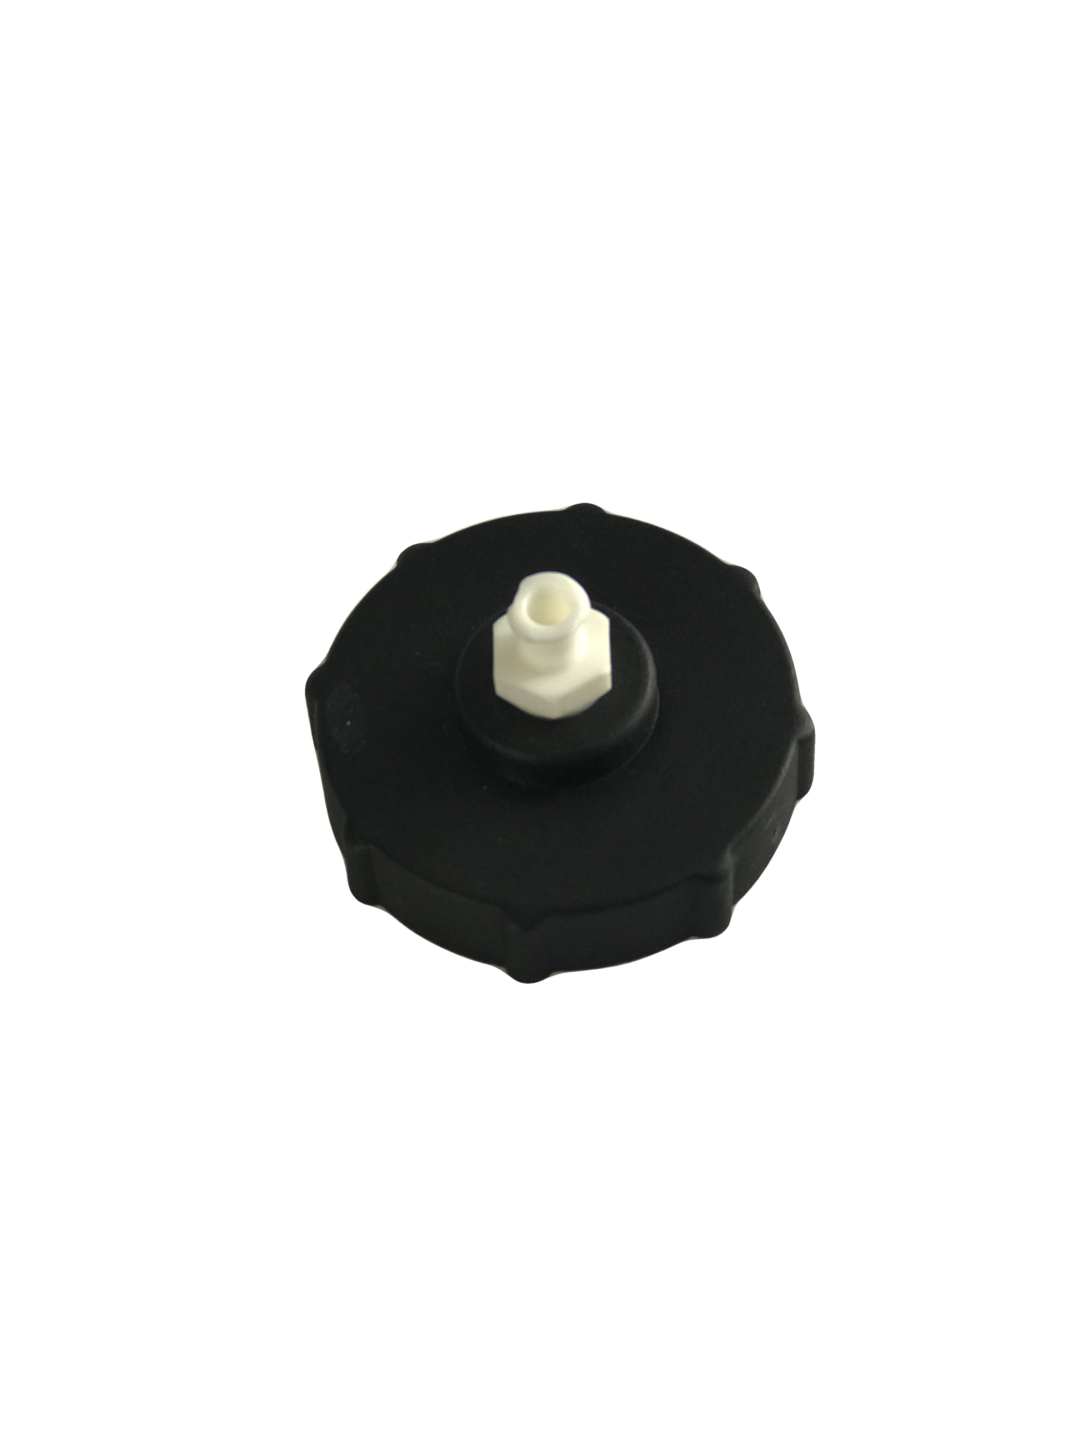 Black plastic BC-01 master cylinder cap with a white top. It is an individual cap adapter designed for Chrysler, Dodge, Jeep, and Plymouth master cylinder reservoirs.  These are low-pressure adapters designed for 15-17 psi.